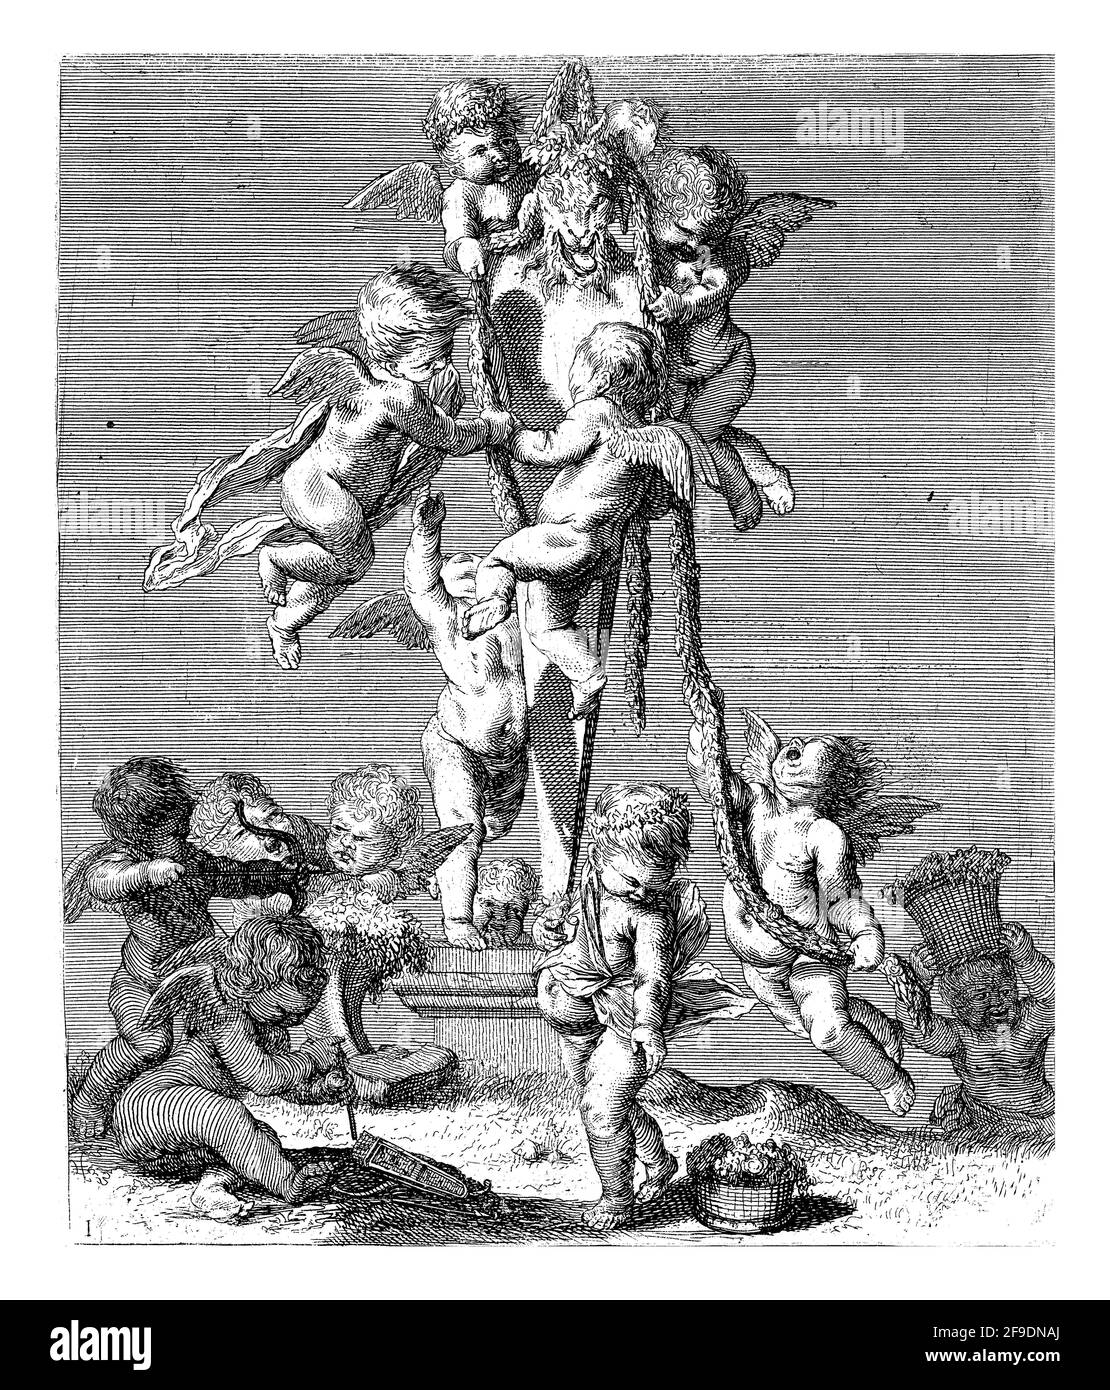 A herm is decorated by putti with a garland. On the column of the statue the inscription: Terra. Stock Photo